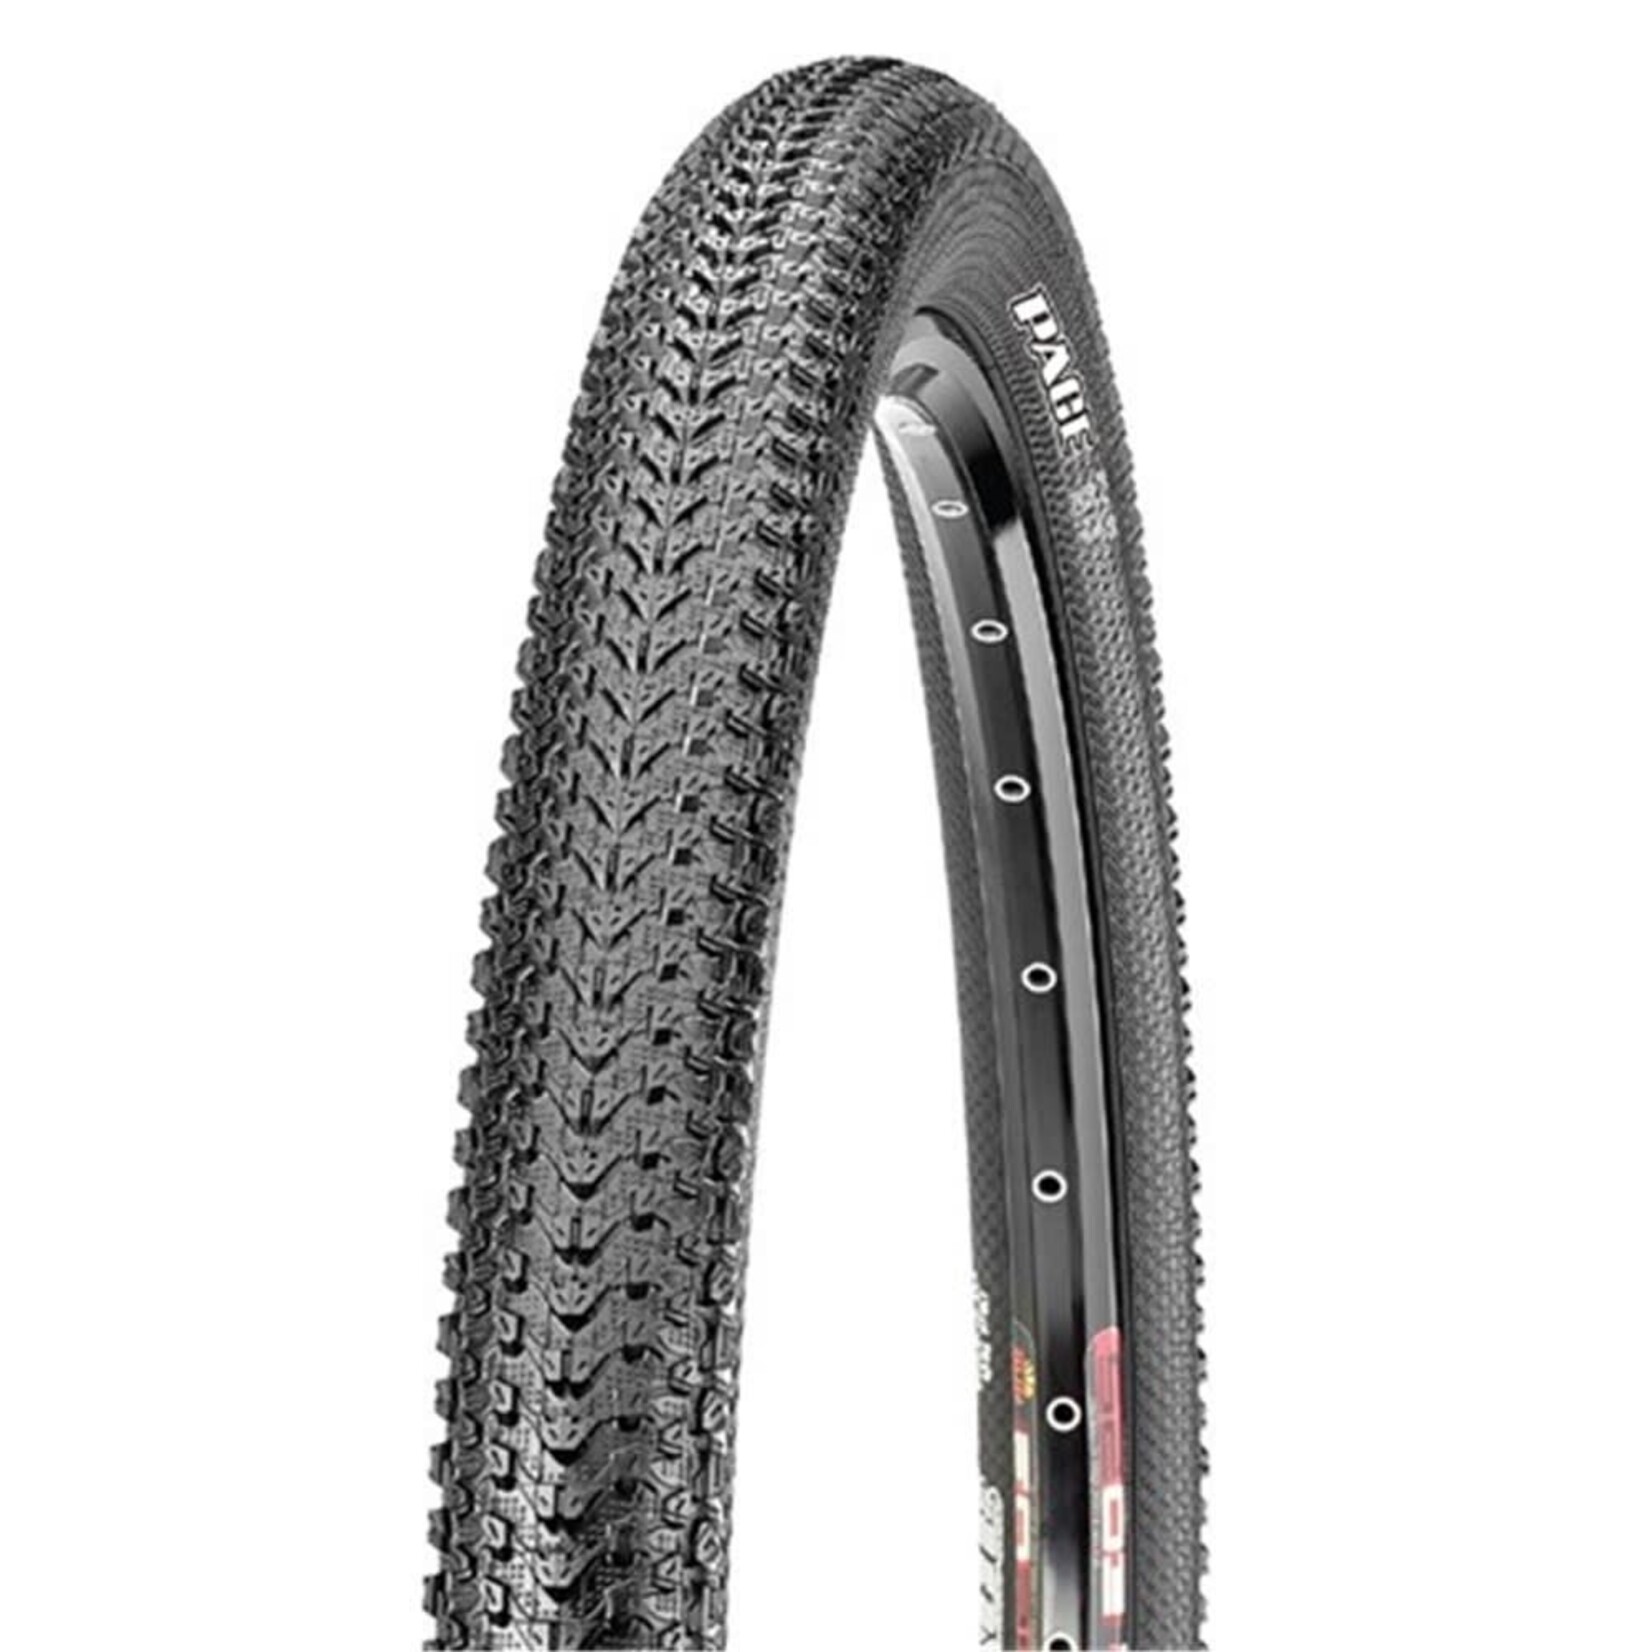 Maxxis Maxxis Pace Bike Tyre - 27.5 X 1.95 - Wire Bead Tyre - 60TPI - Pair